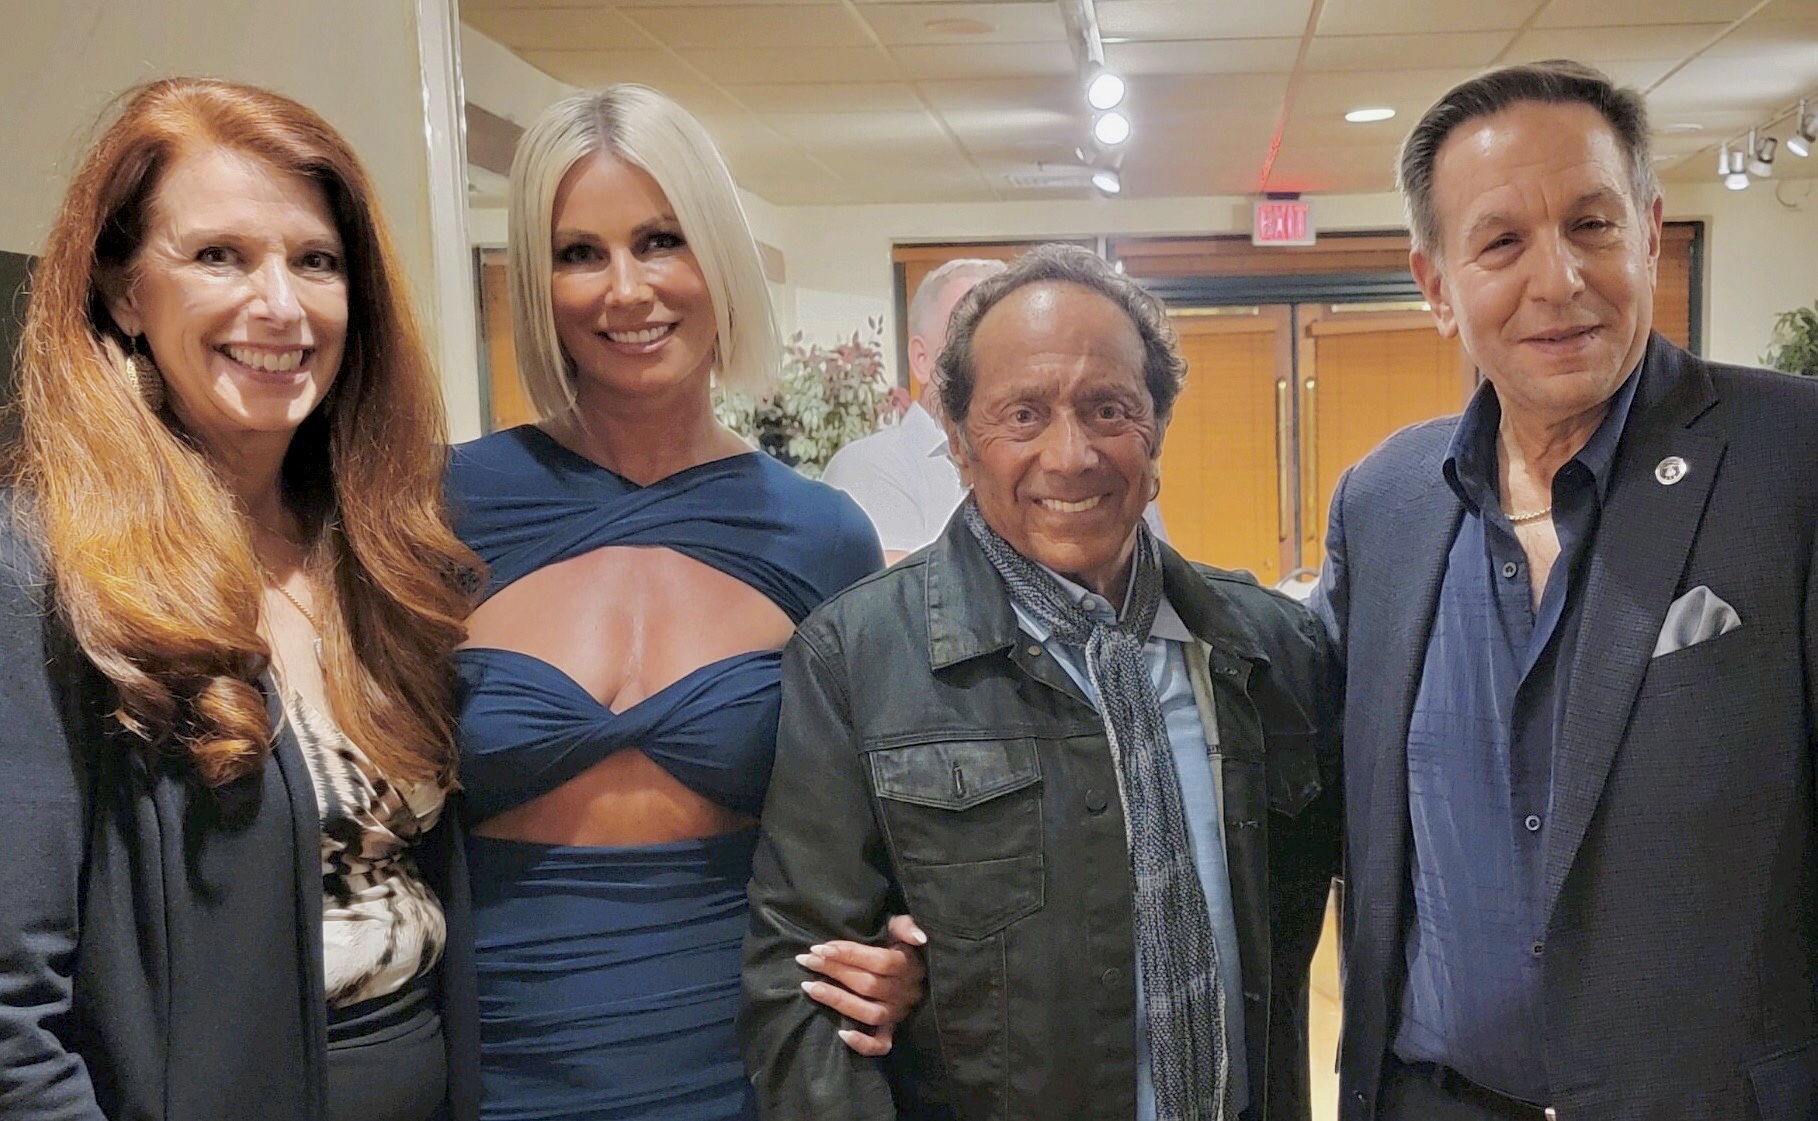 Leslie Laredo (left) and husband Jeff Leibowitz (right) with Paul Anka and his friend Michelle after Anka's show at the Kravis Center